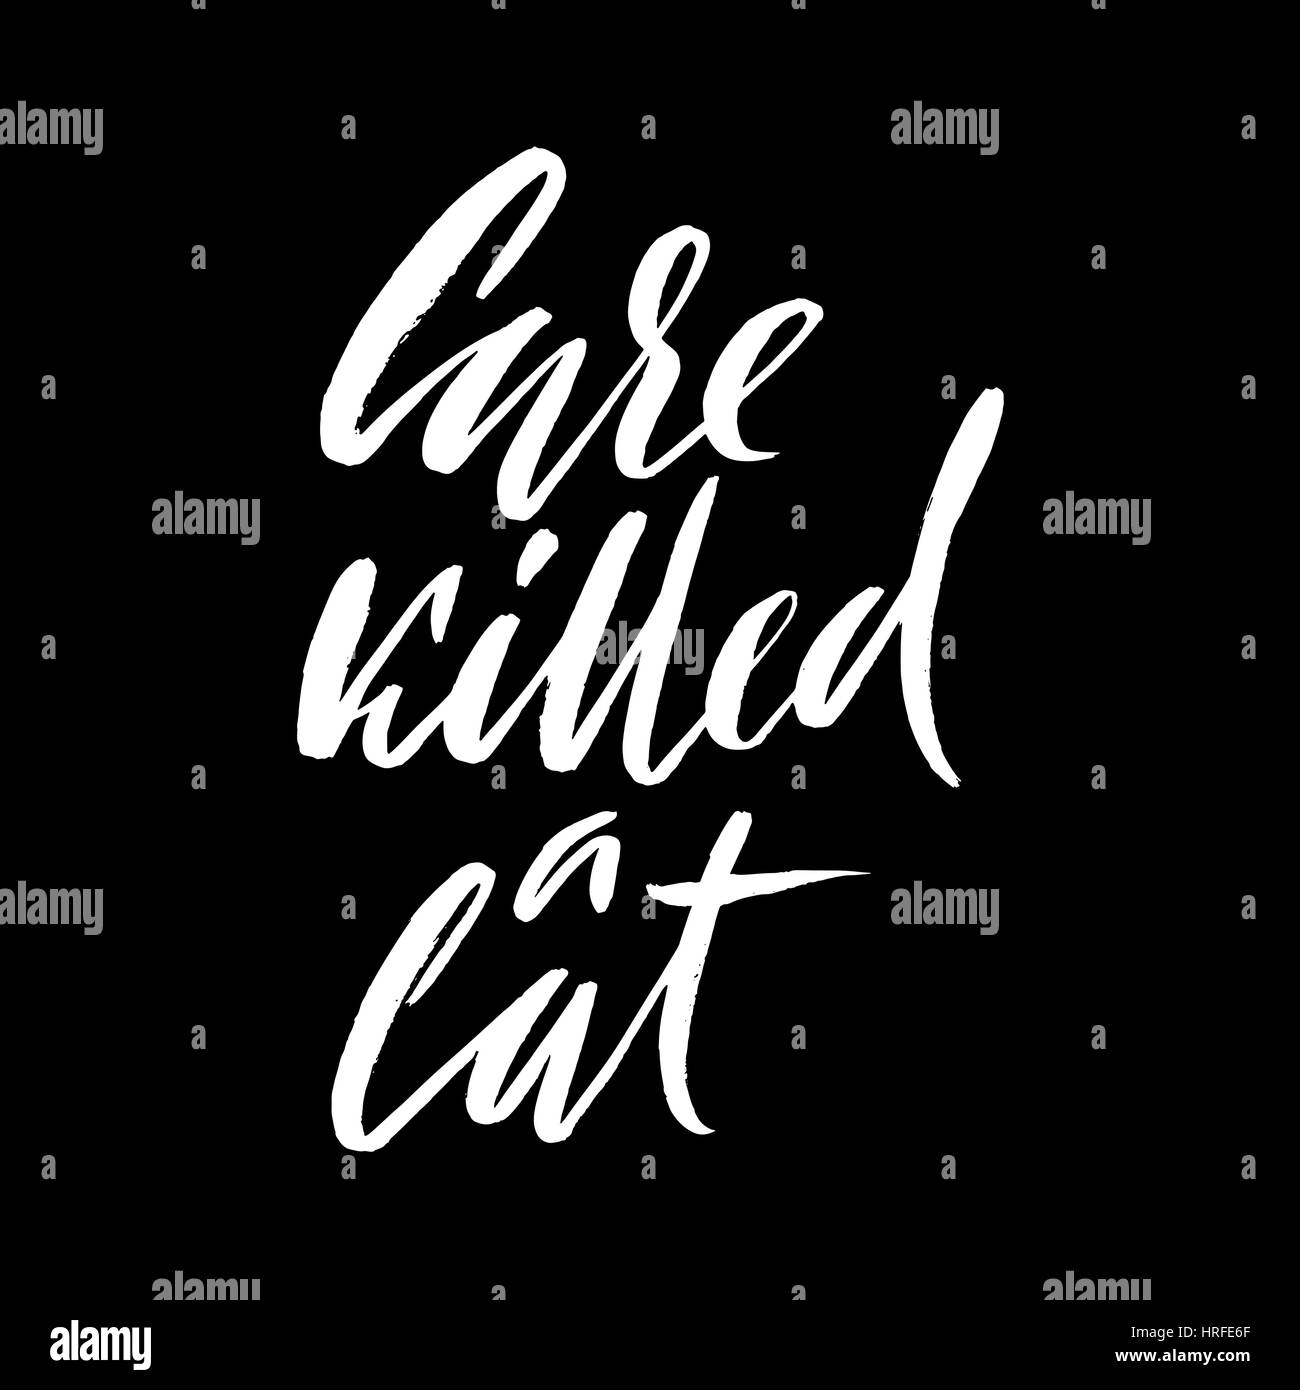 Care killed a cat. Hand drawn lettering proverb. Vector typography design. Handwritten inscription Stock Vector